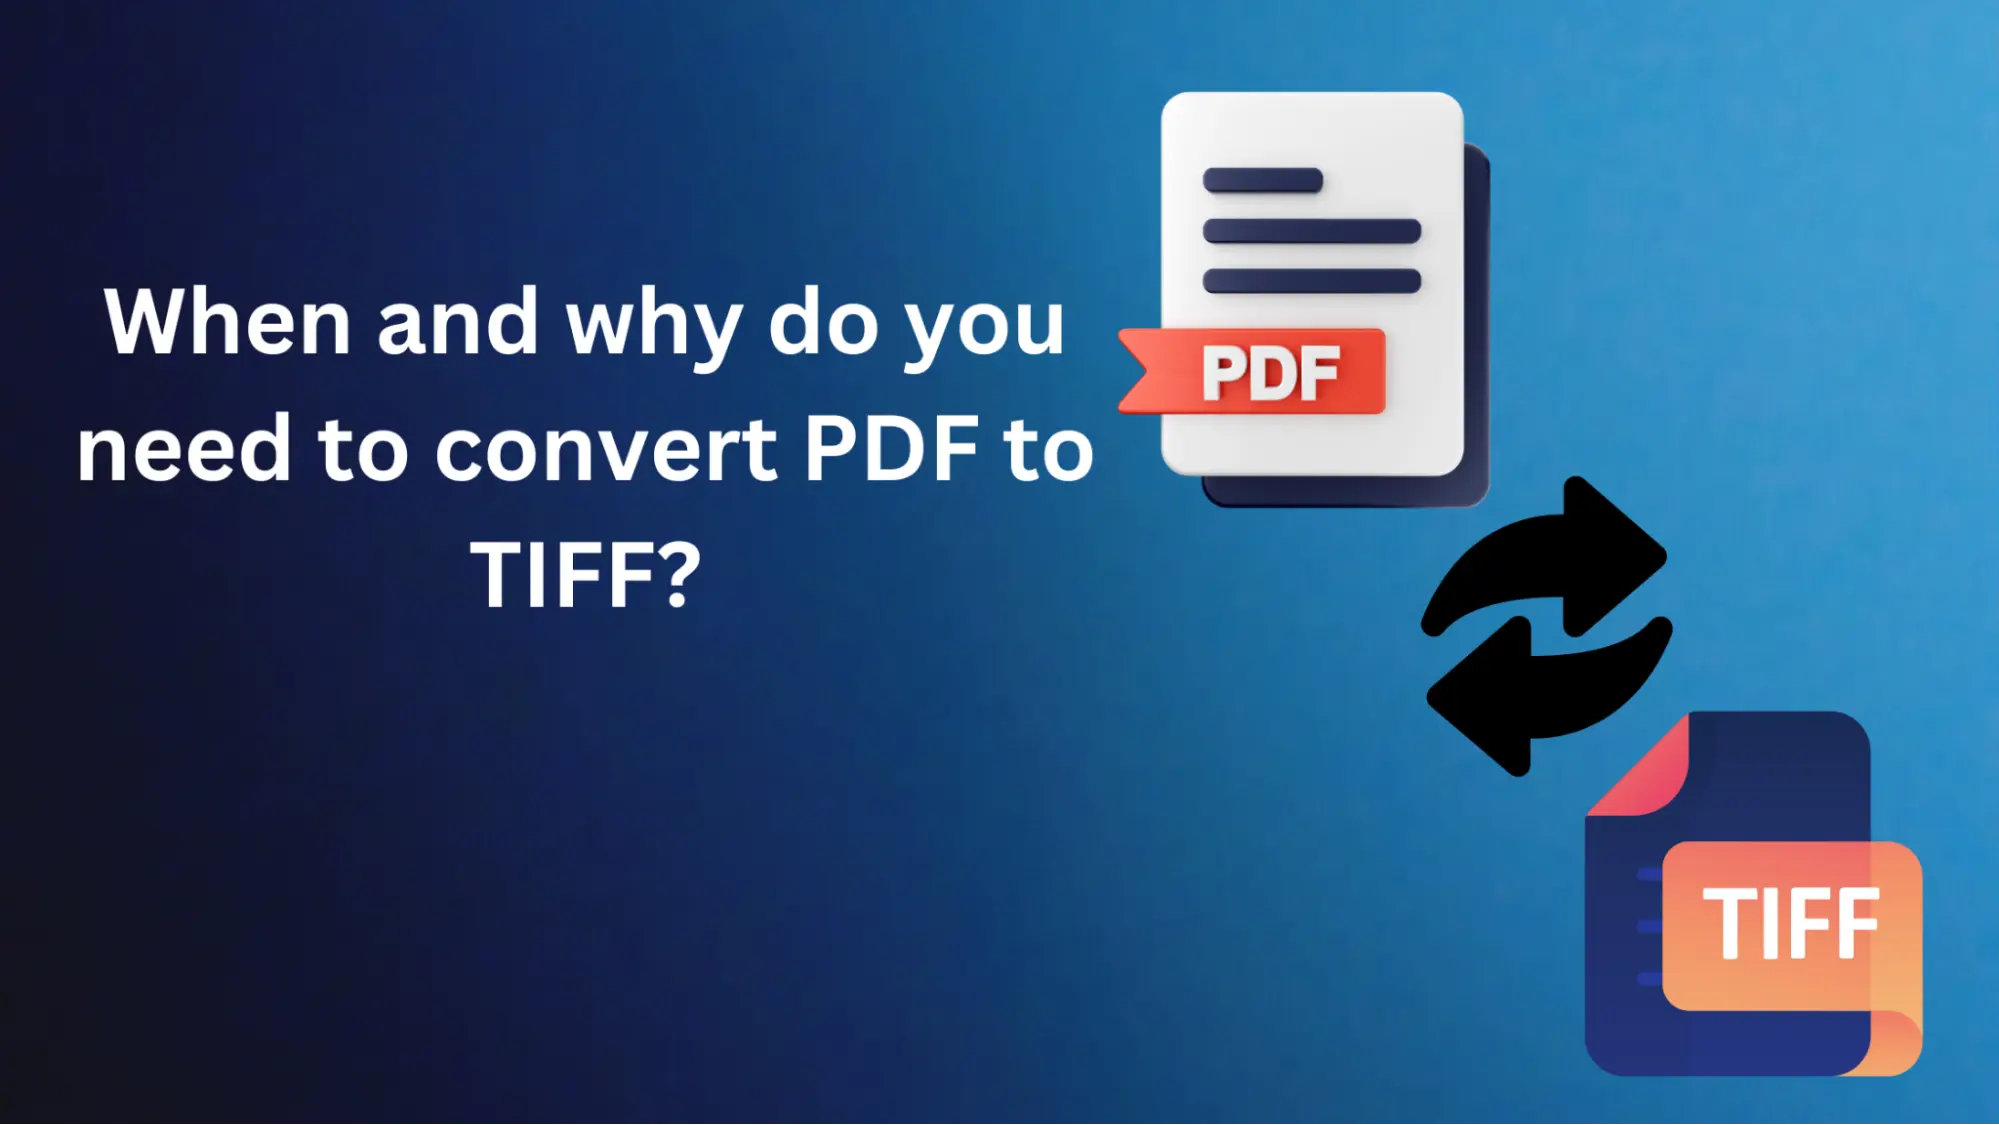 When and why do you need to convert PDF to TIFF?